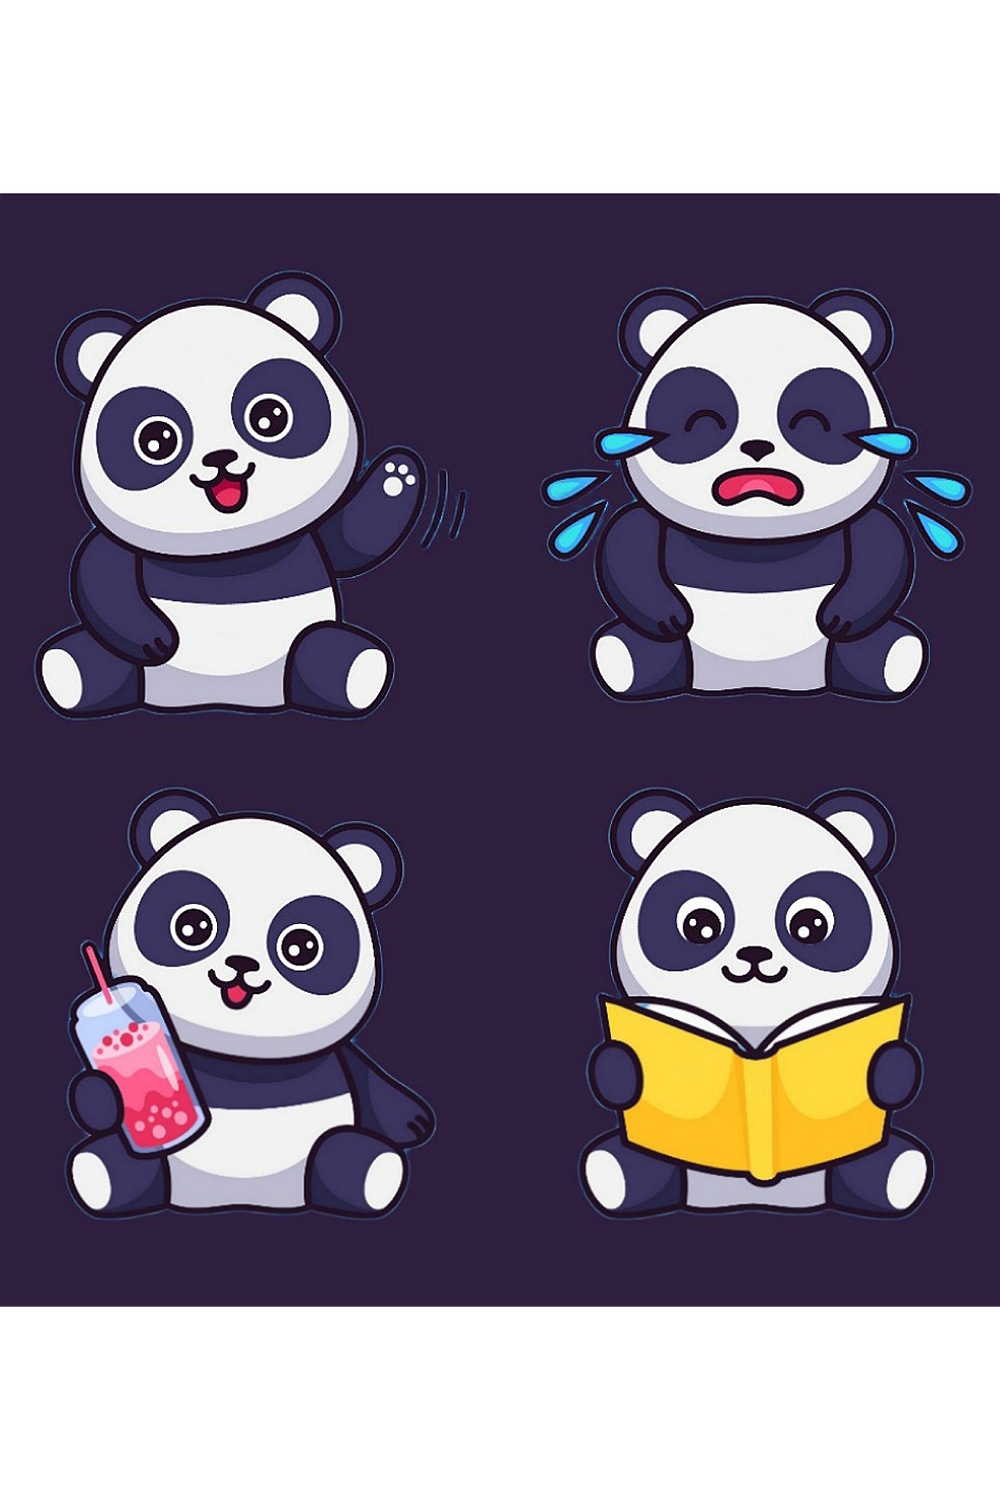 Panda playing vector pinterest preview image.